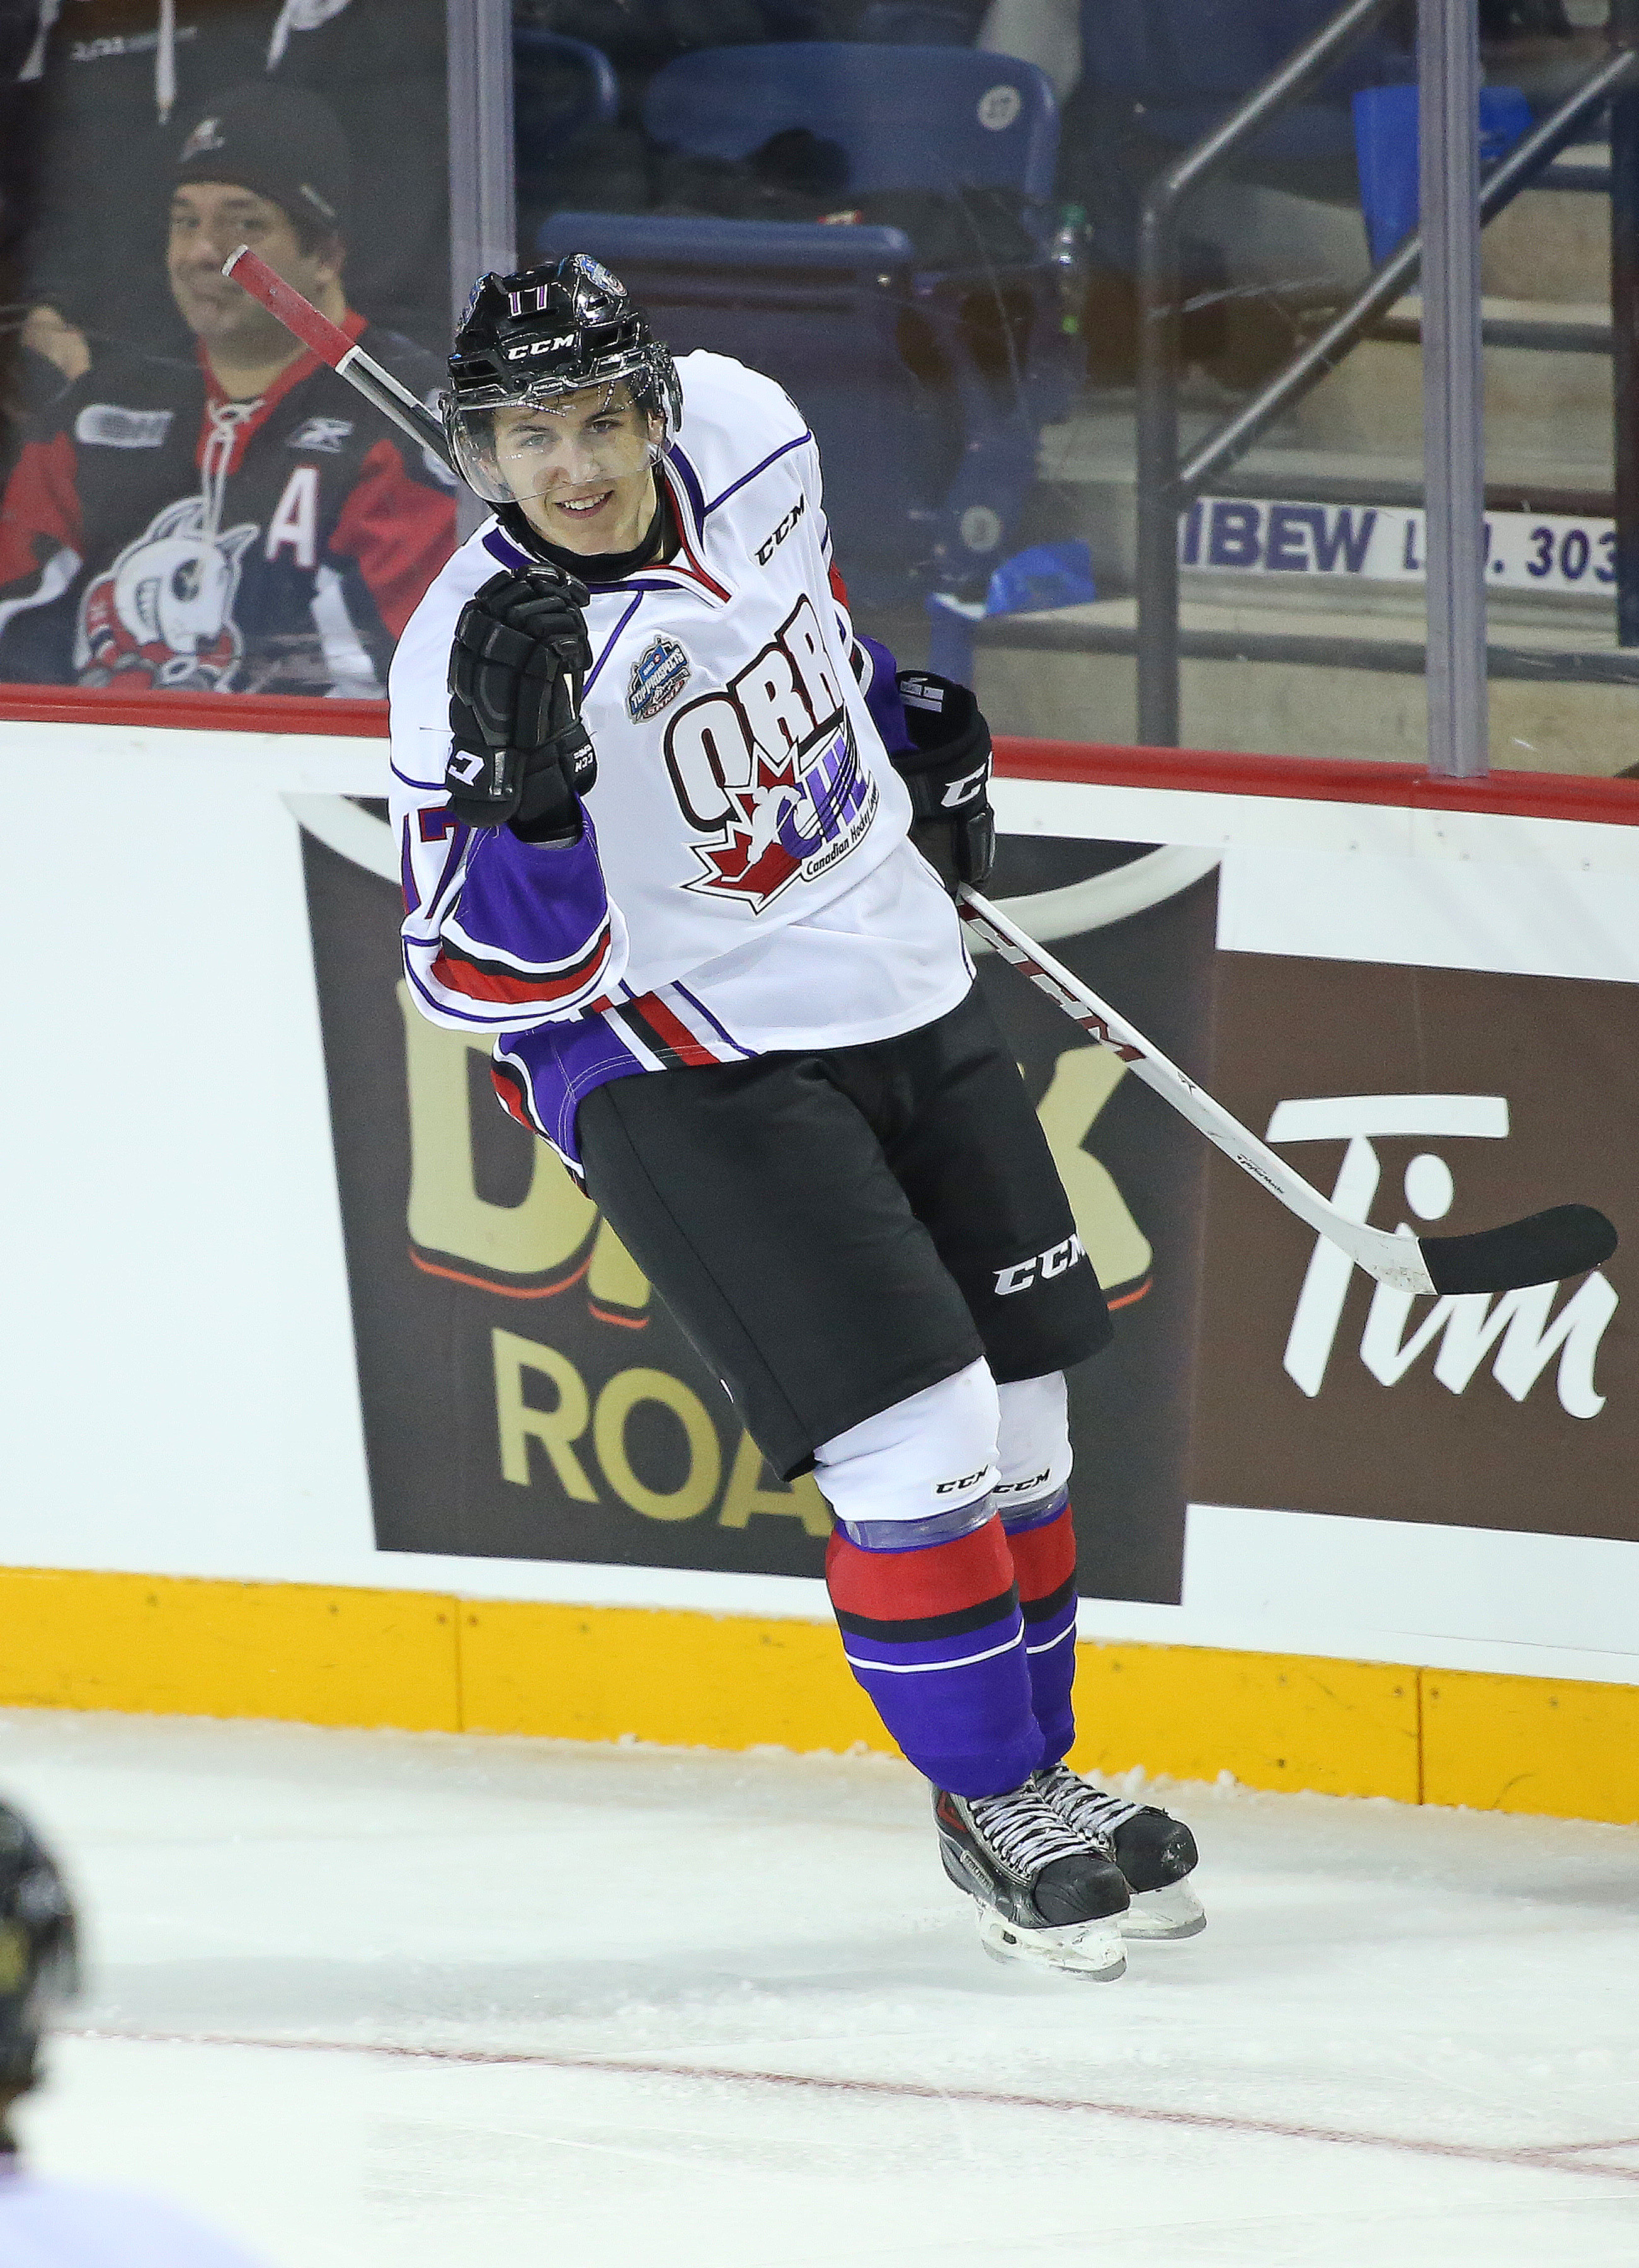 Travis Konecny cemented his position as a first round selection with his performance in the CHL Top Prospects game.